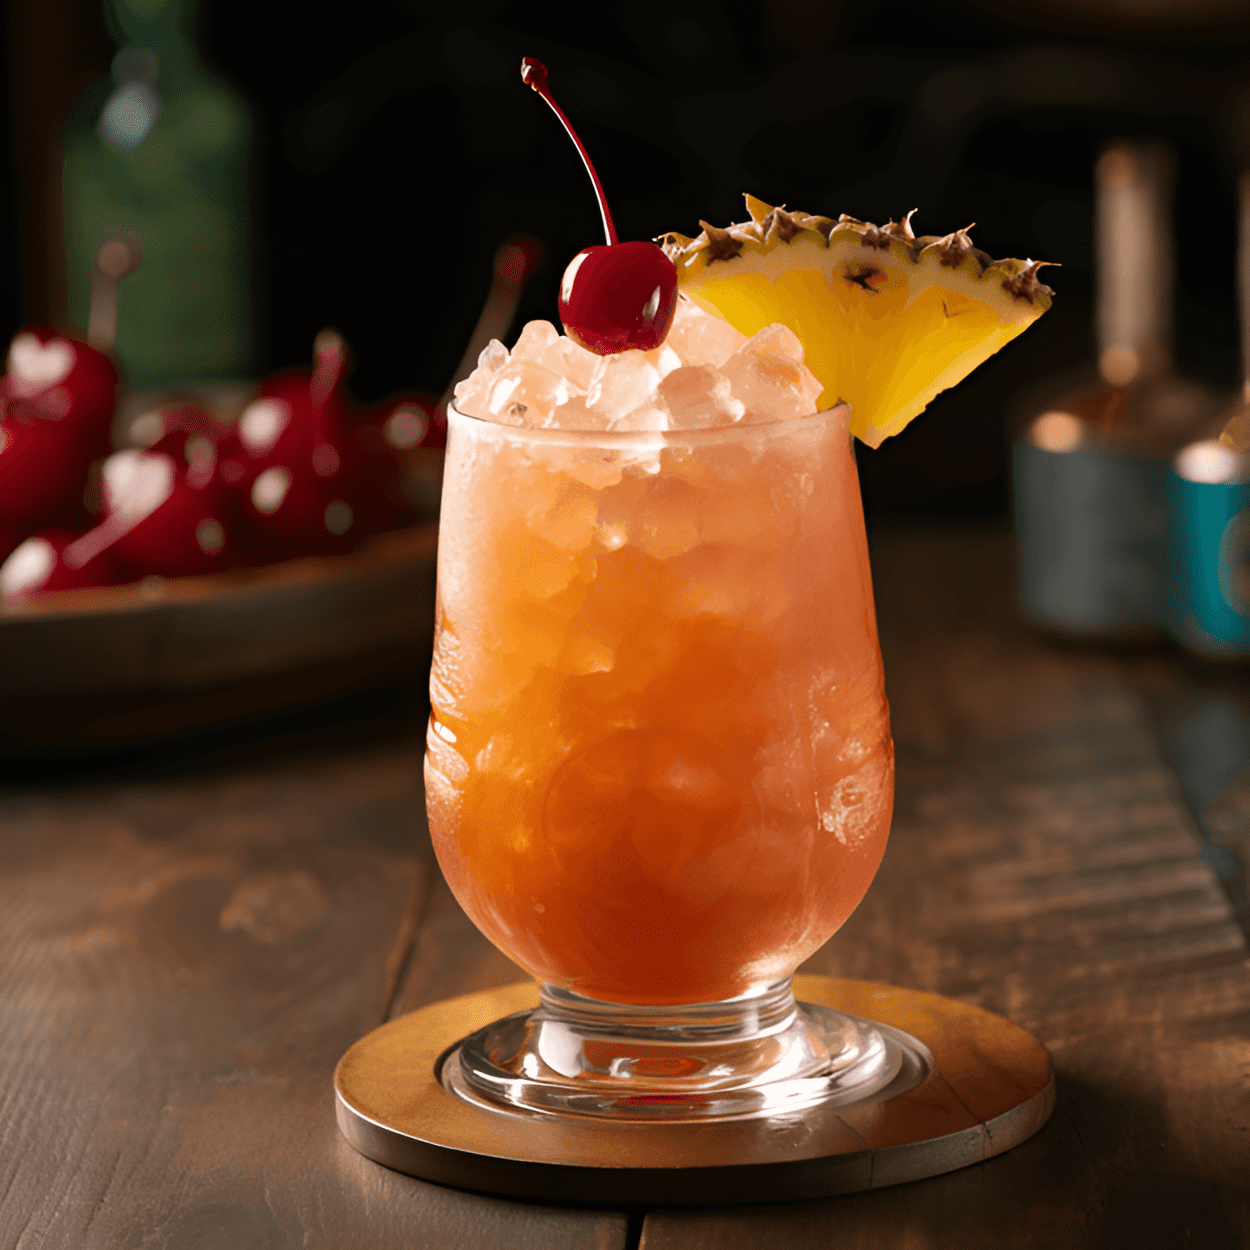 Wrecked Pirate Cocktail Recipe - The Wrecked Pirate is a robust and flavorful cocktail. It has a strong rum base, balanced by the sweet and tangy flavors of pineapple and lime. The hint of coconut adds a tropical flair, making it a refreshing and invigorating drink.